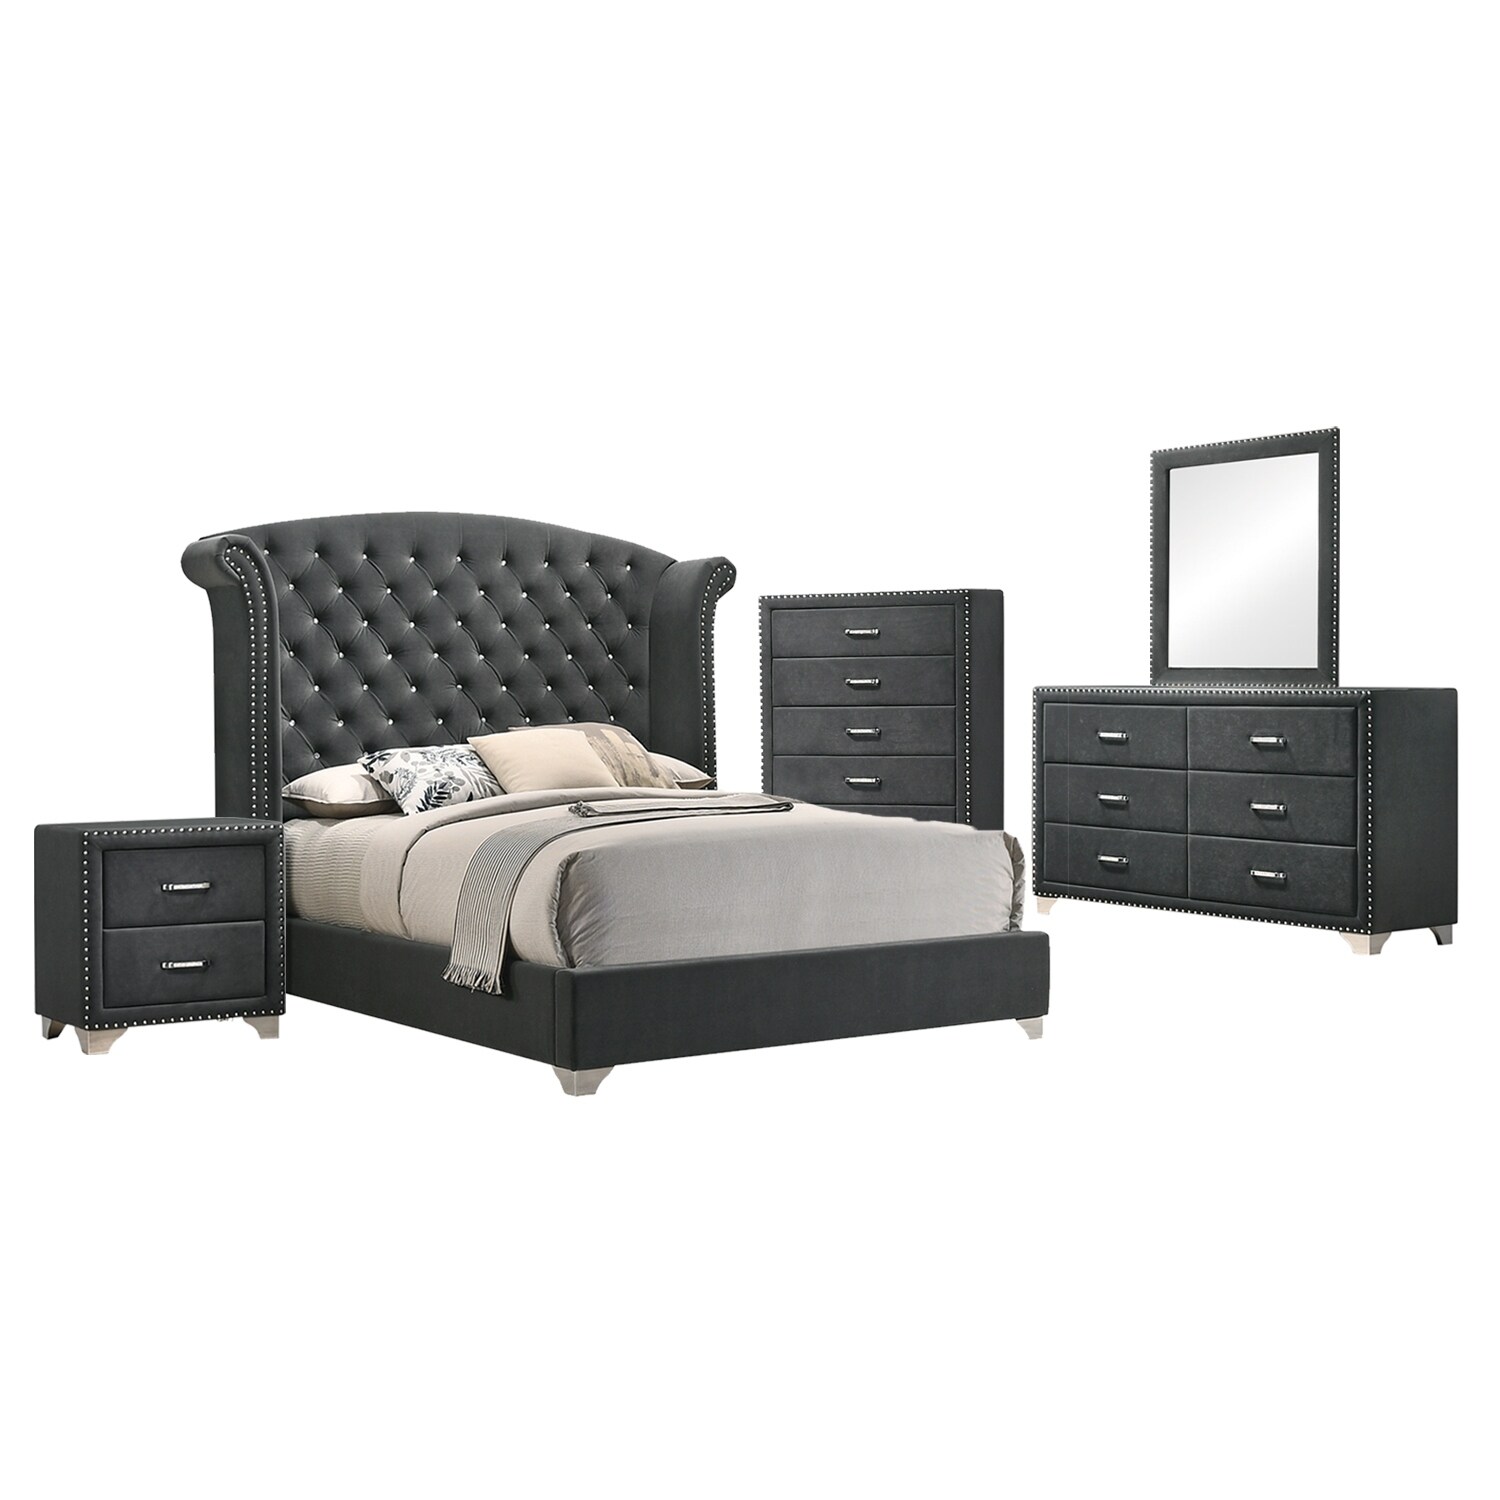 Upholstered Queen Bedroom Set In Grey And Chrome